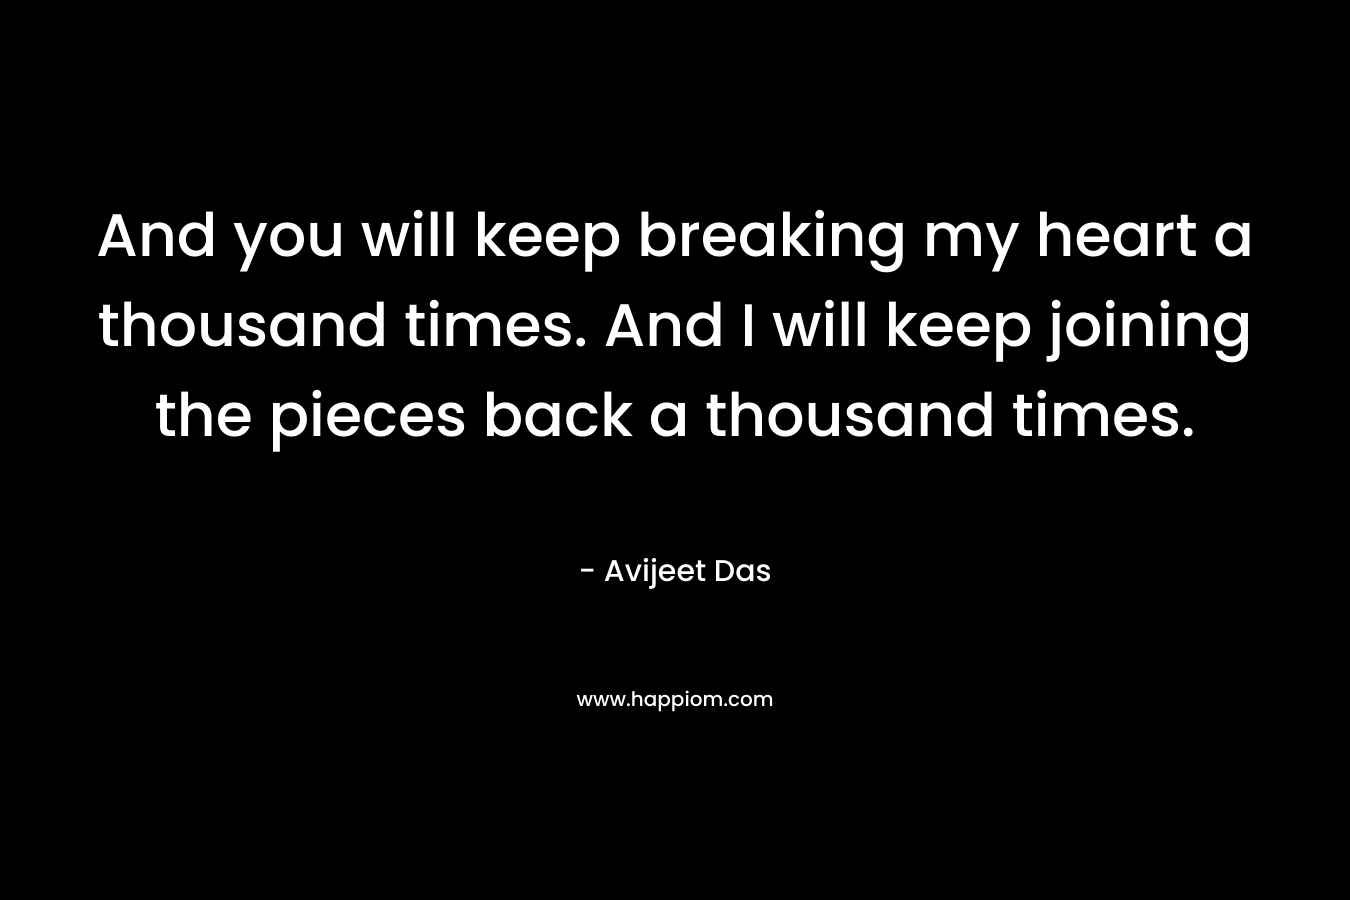 And you will keep breaking my heart a thousand times. And I will keep joining the pieces back a thousand times.